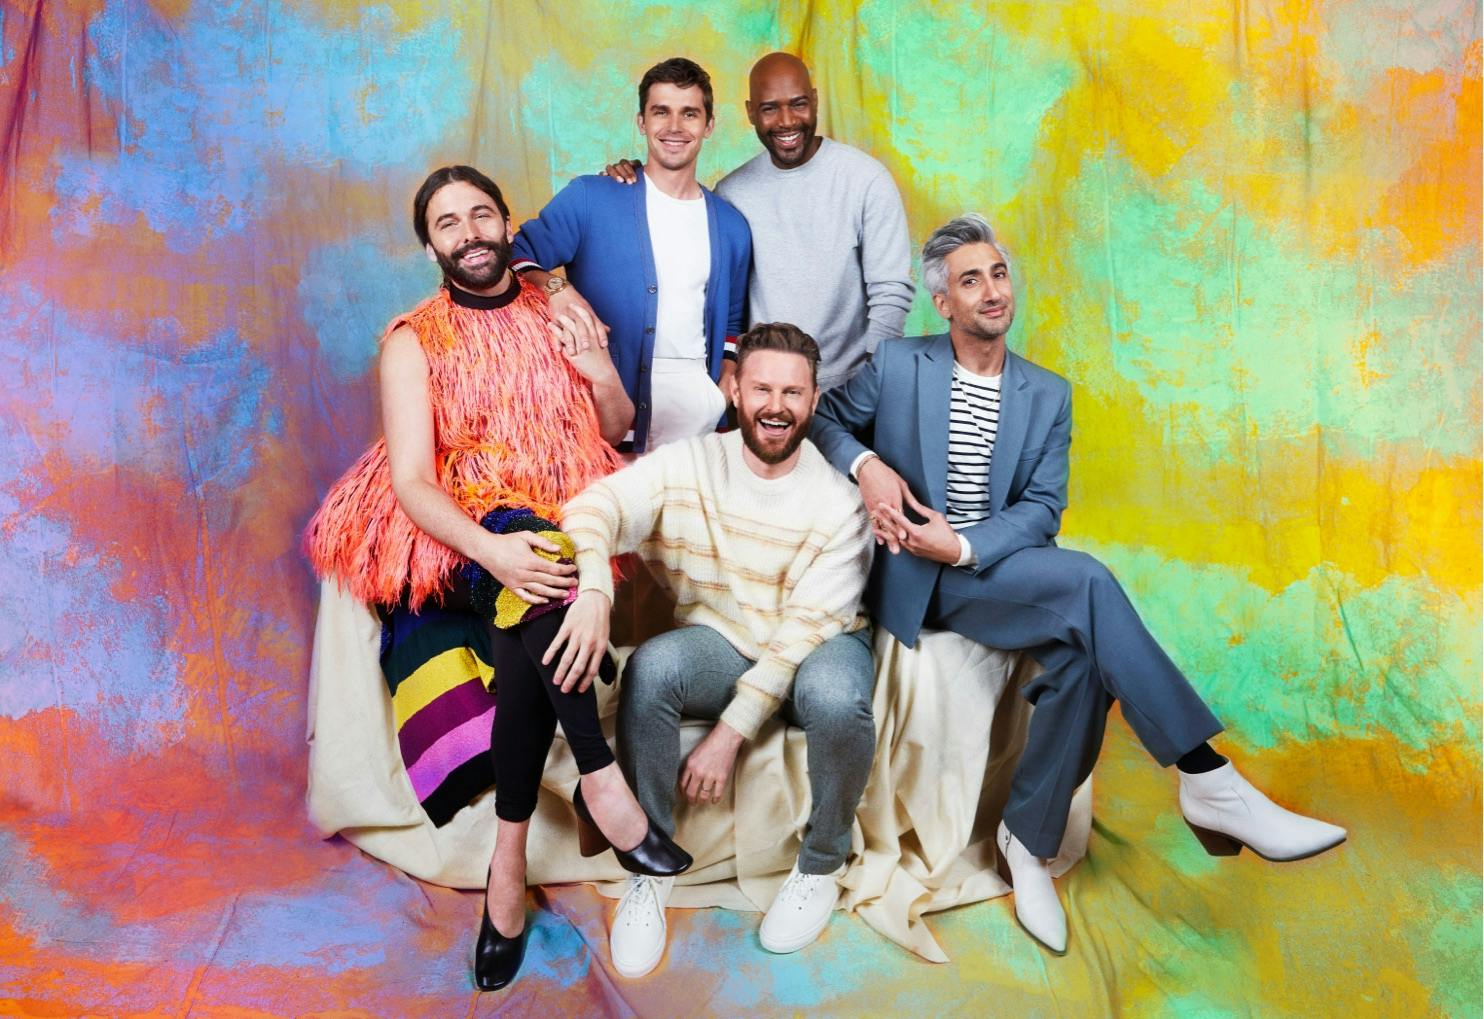 The Fab Five sit together against an orange and green spotted background. From left to right; Jonathan Van Ness wears a furry orange vest, Antoni Porowski wears a blue cardigan, Karamo Brown wears a light blue sweater, Bobby Berk wears jeans and a striped sweater, Tan France wears a grey suit with white boots.